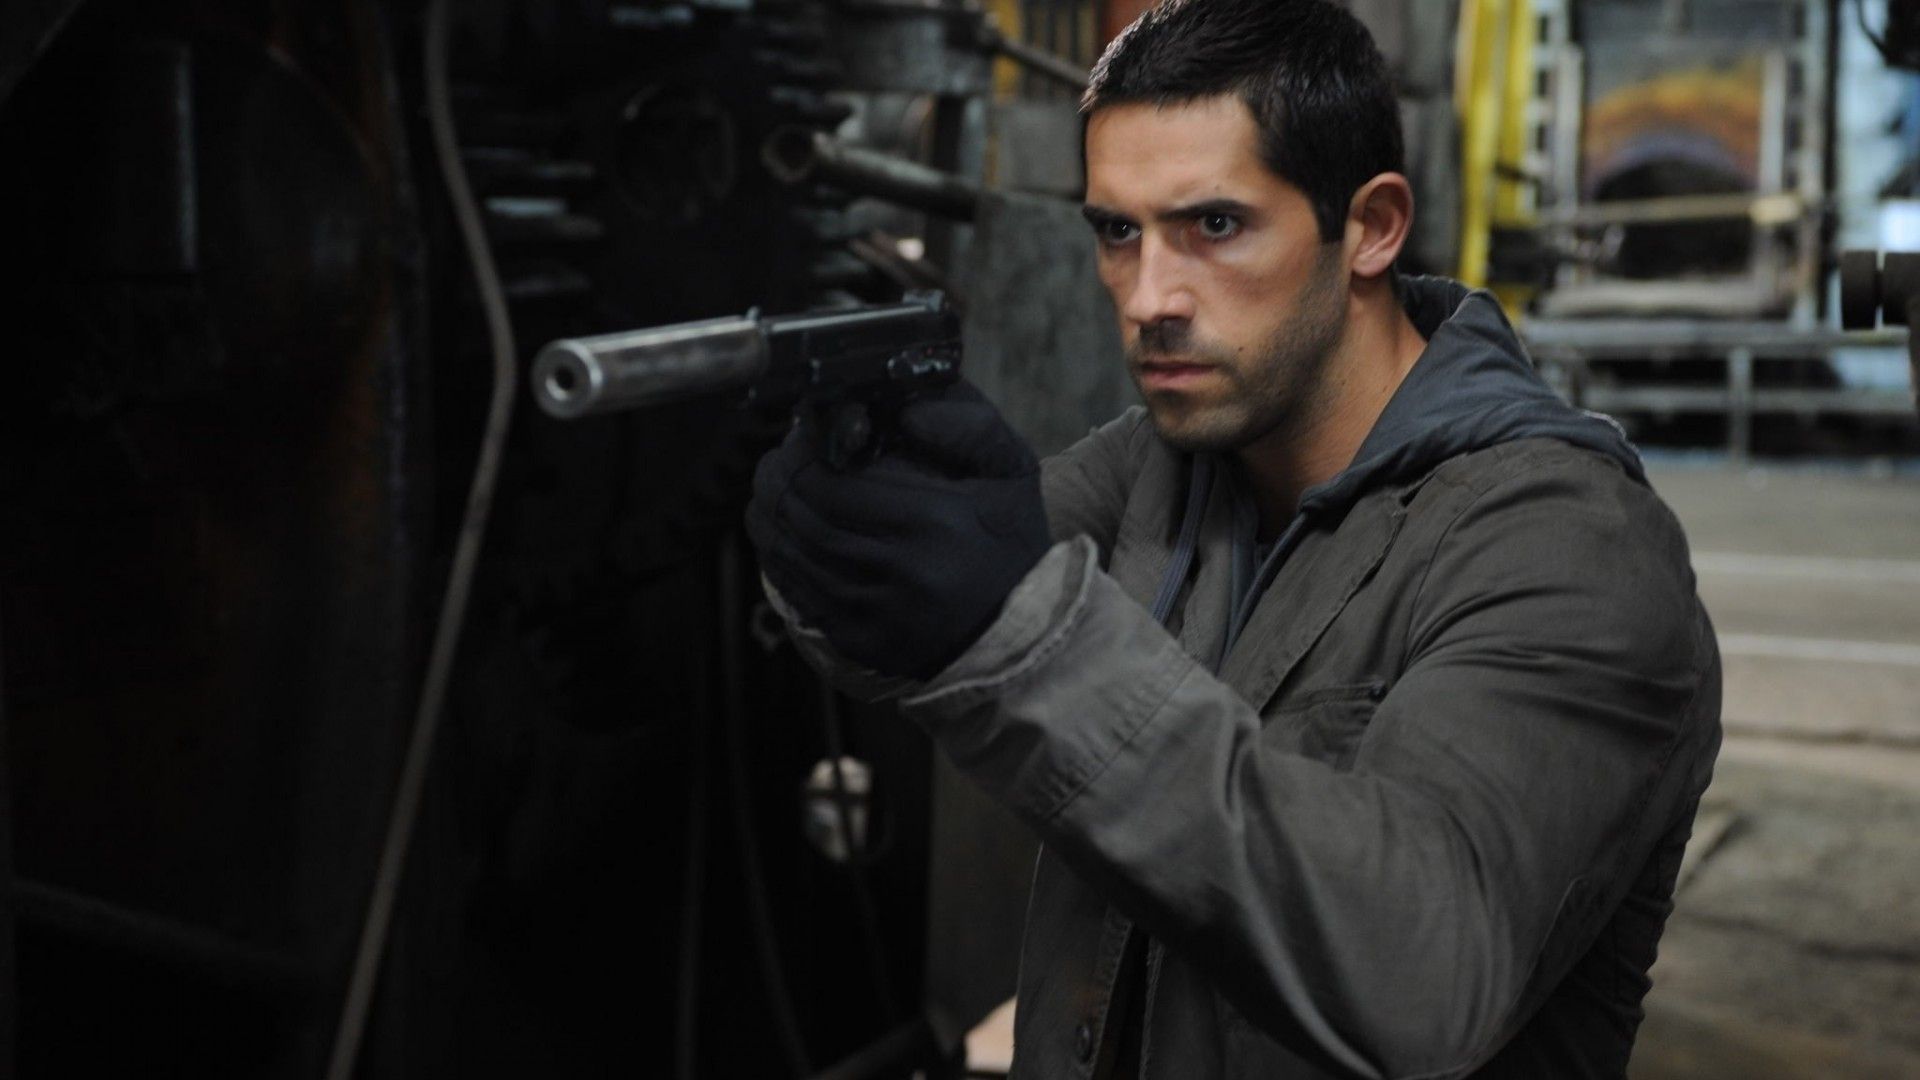 Movie Actor Scott Adkins wallpapers and images - wallpapers ...